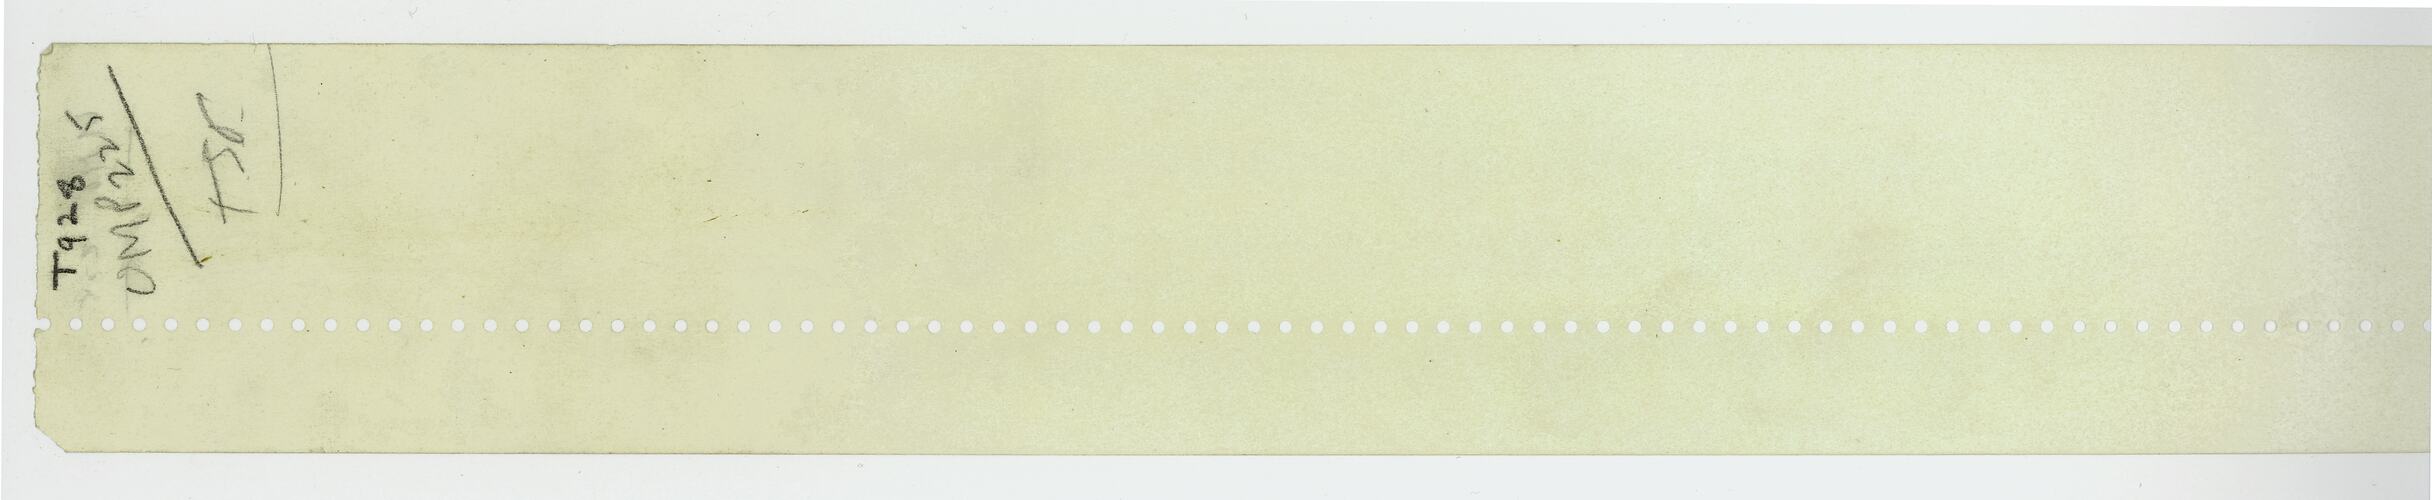 Paper tape: narrow, yellowing, paper with perforation line.